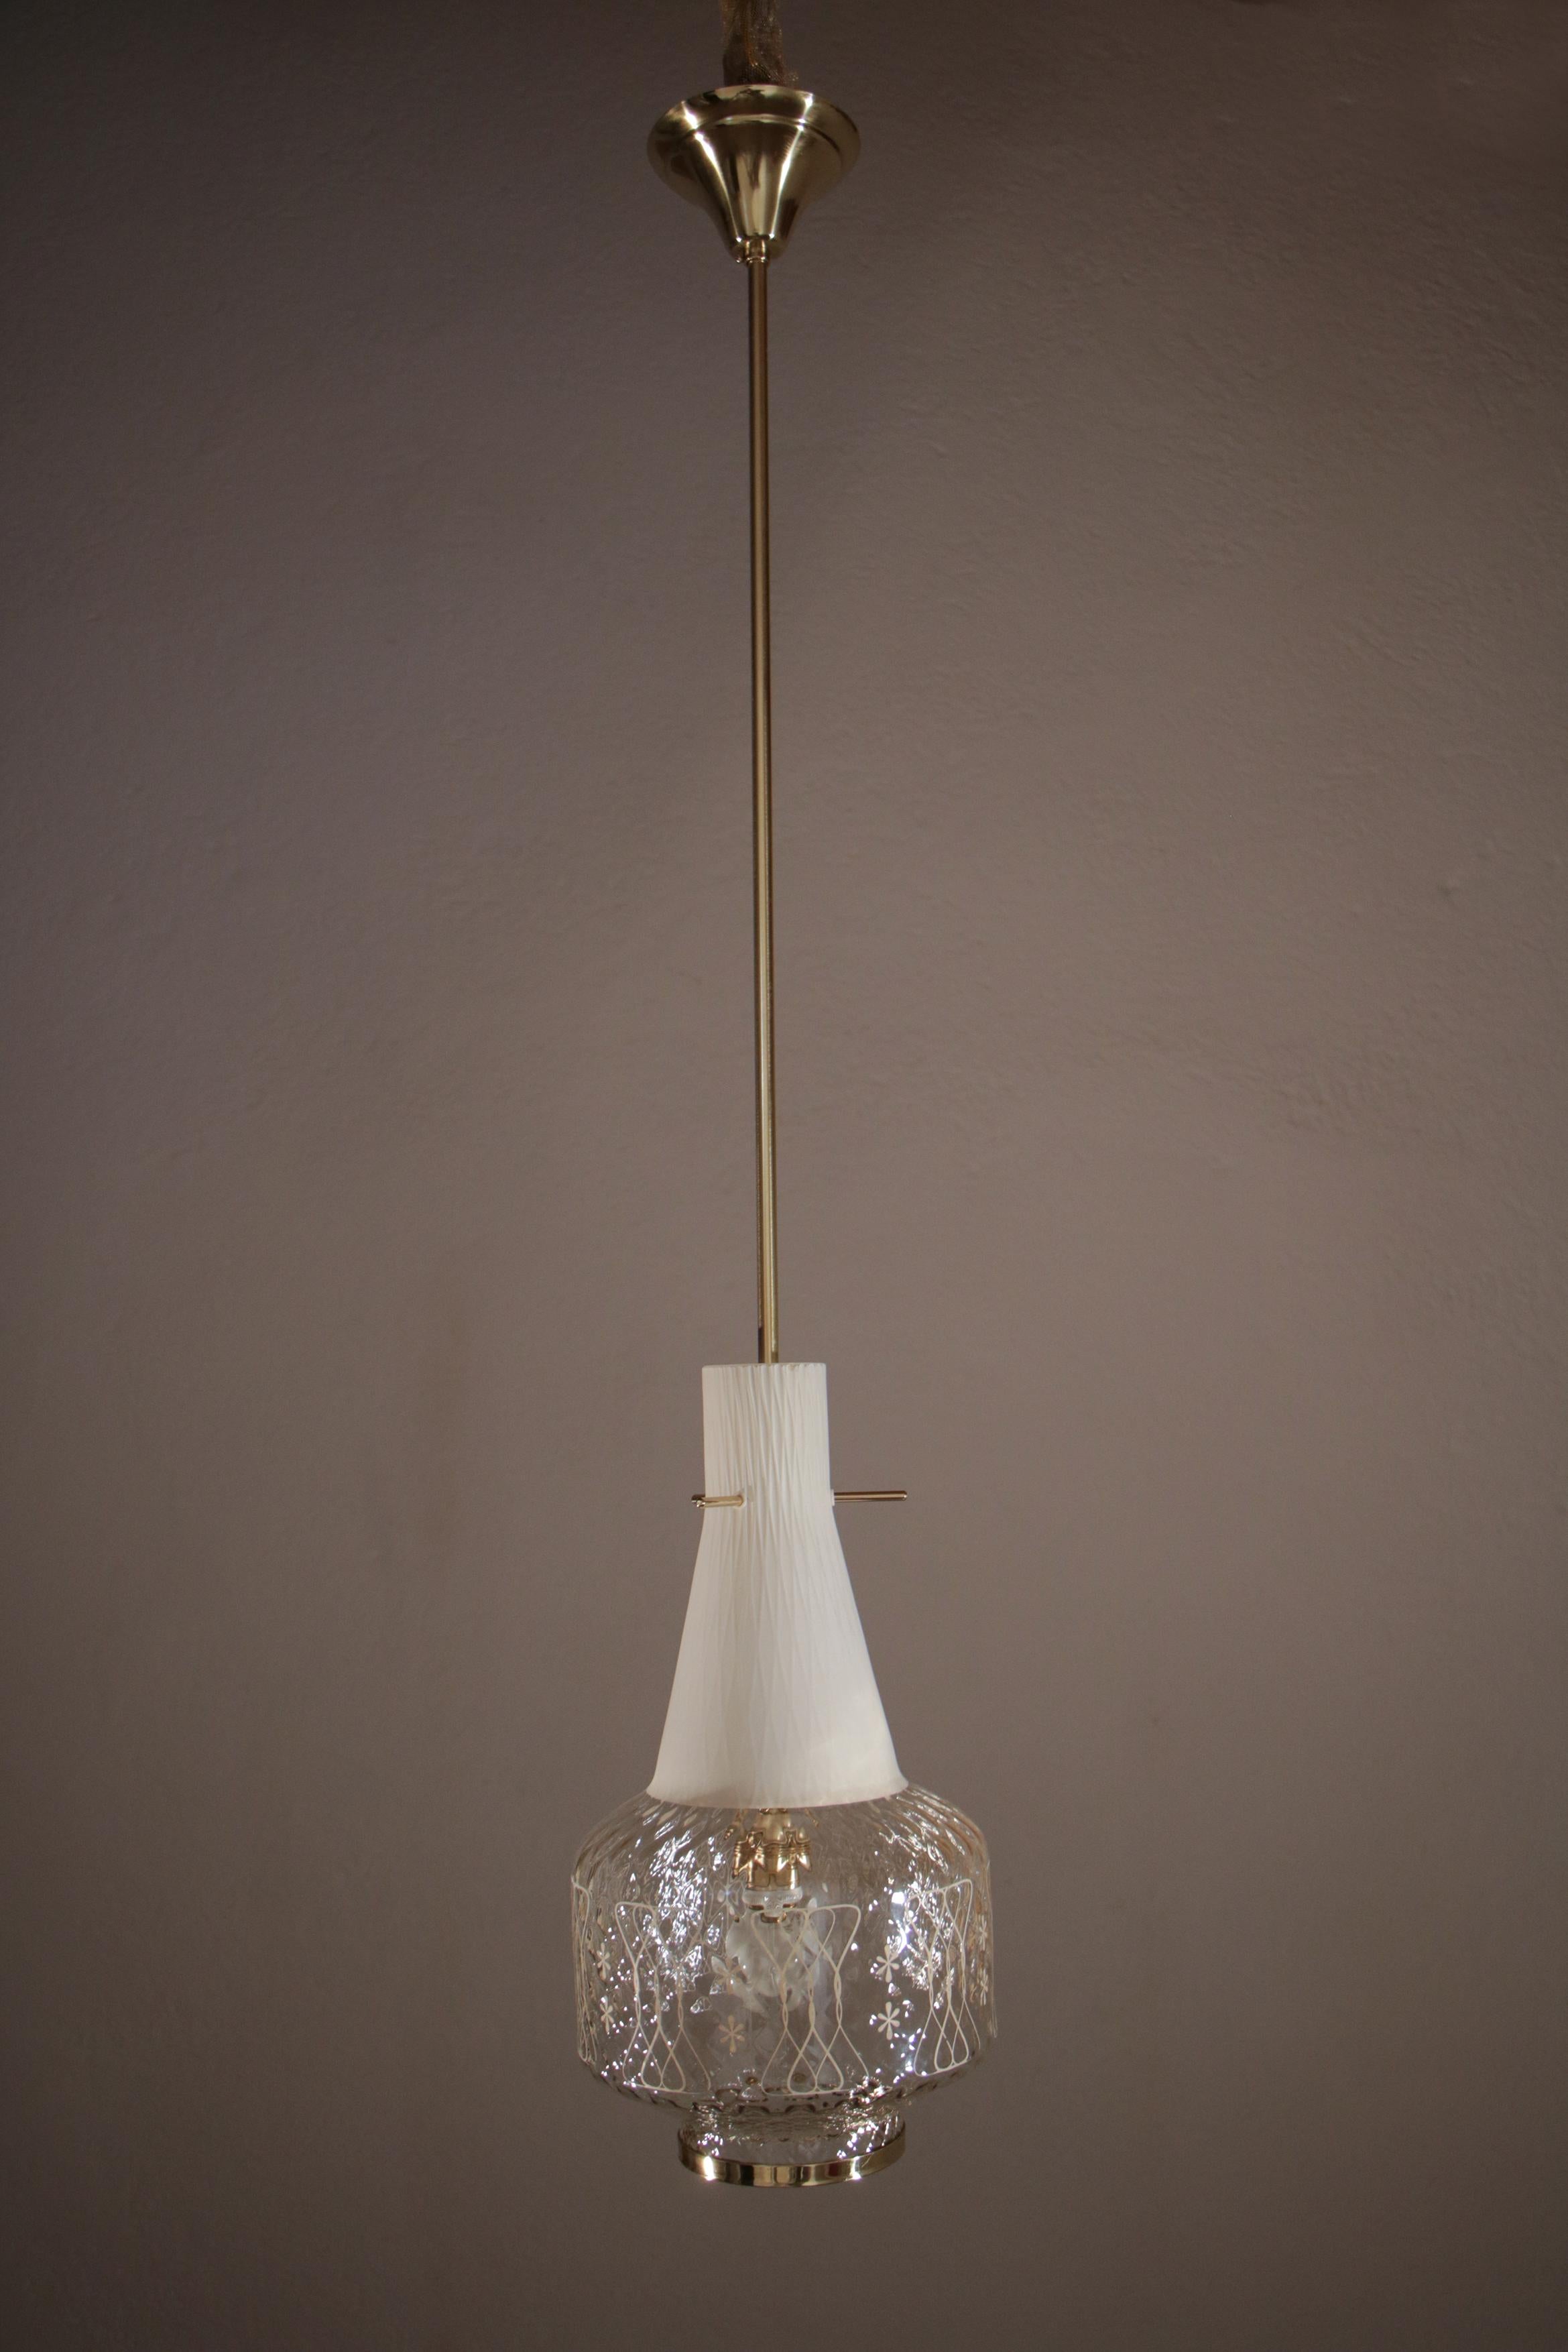 Italian Art Deco Decorative and Satin Glass Hanging Lamp, 1950s In Good Condition For Sale In Traversetolo, IT